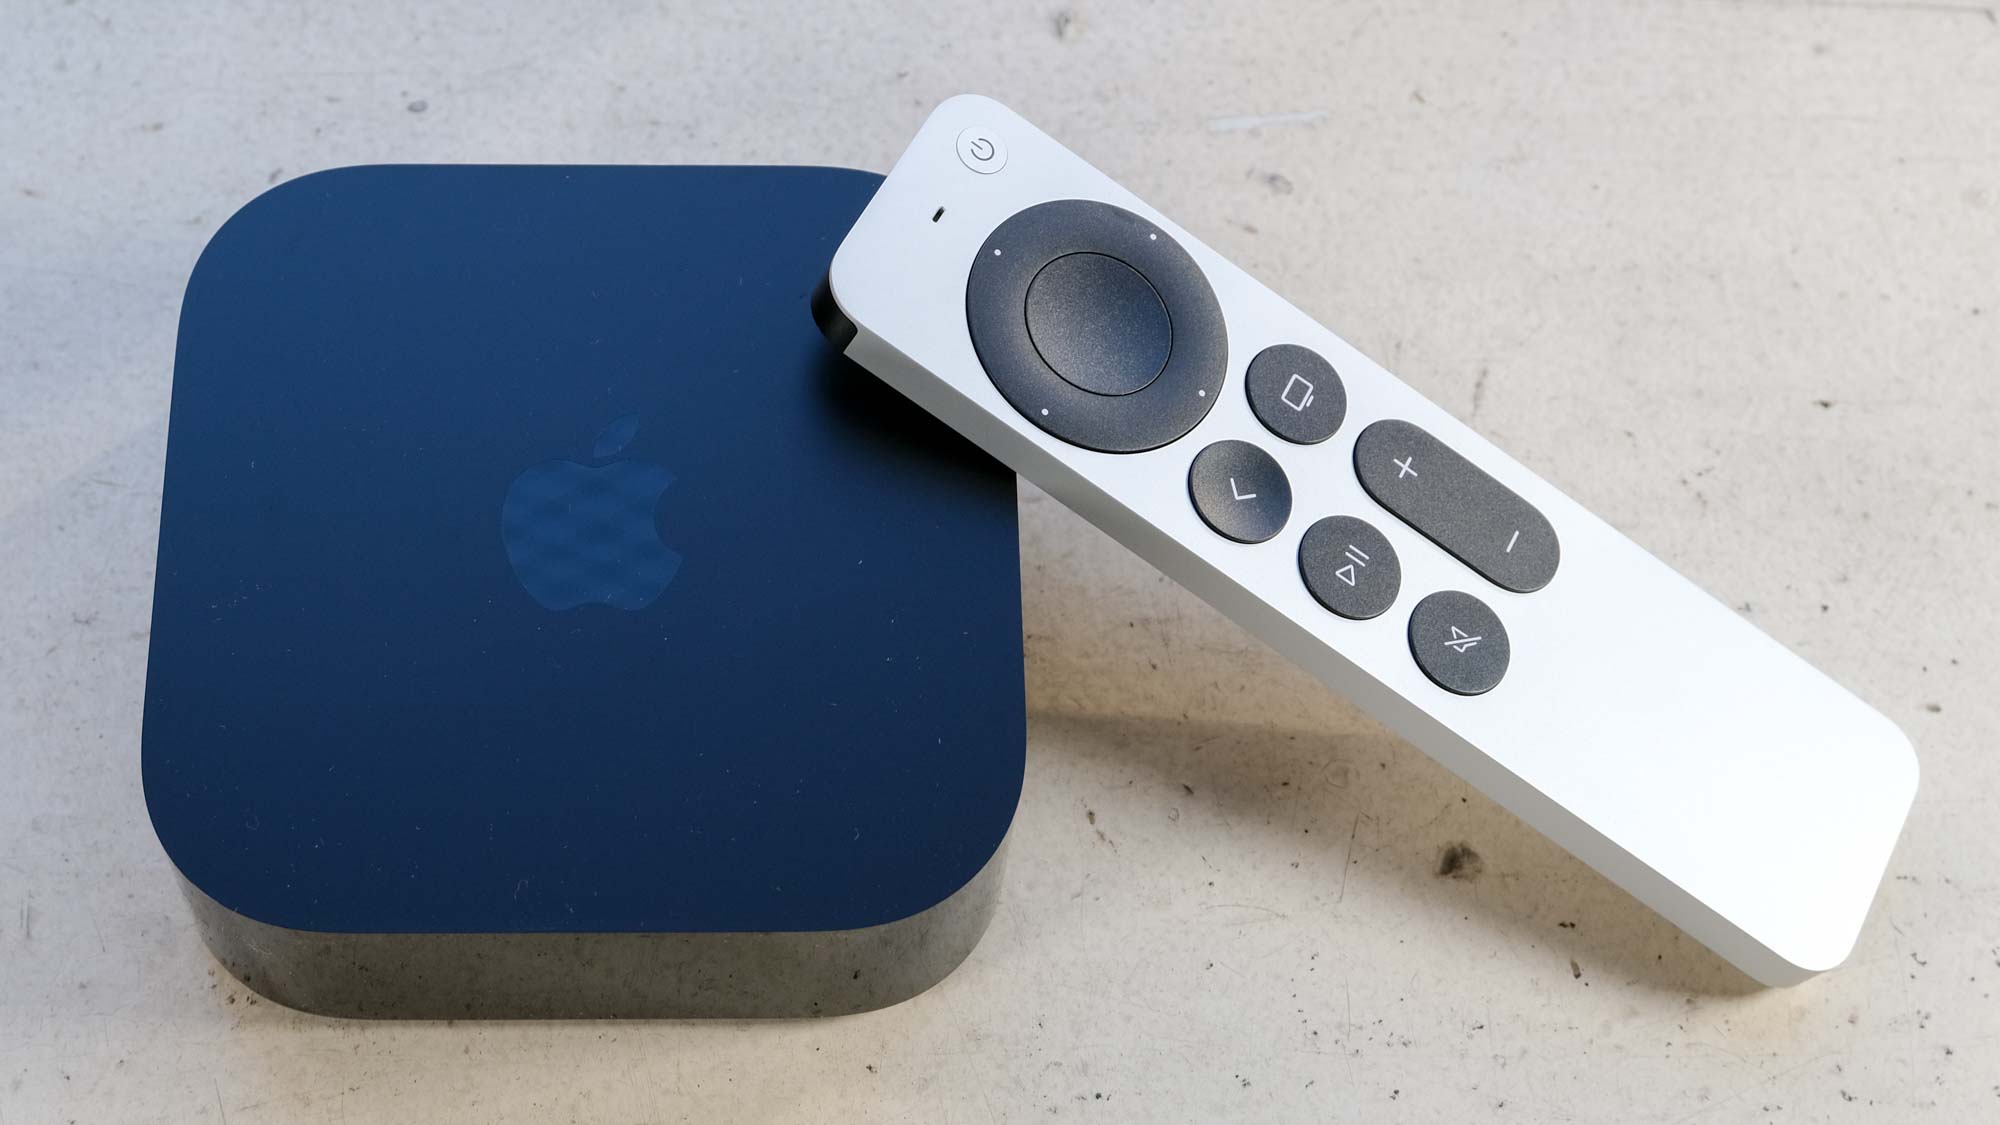 The Apple TV 4K (2022) is on a white surface, with its remote propped against it.